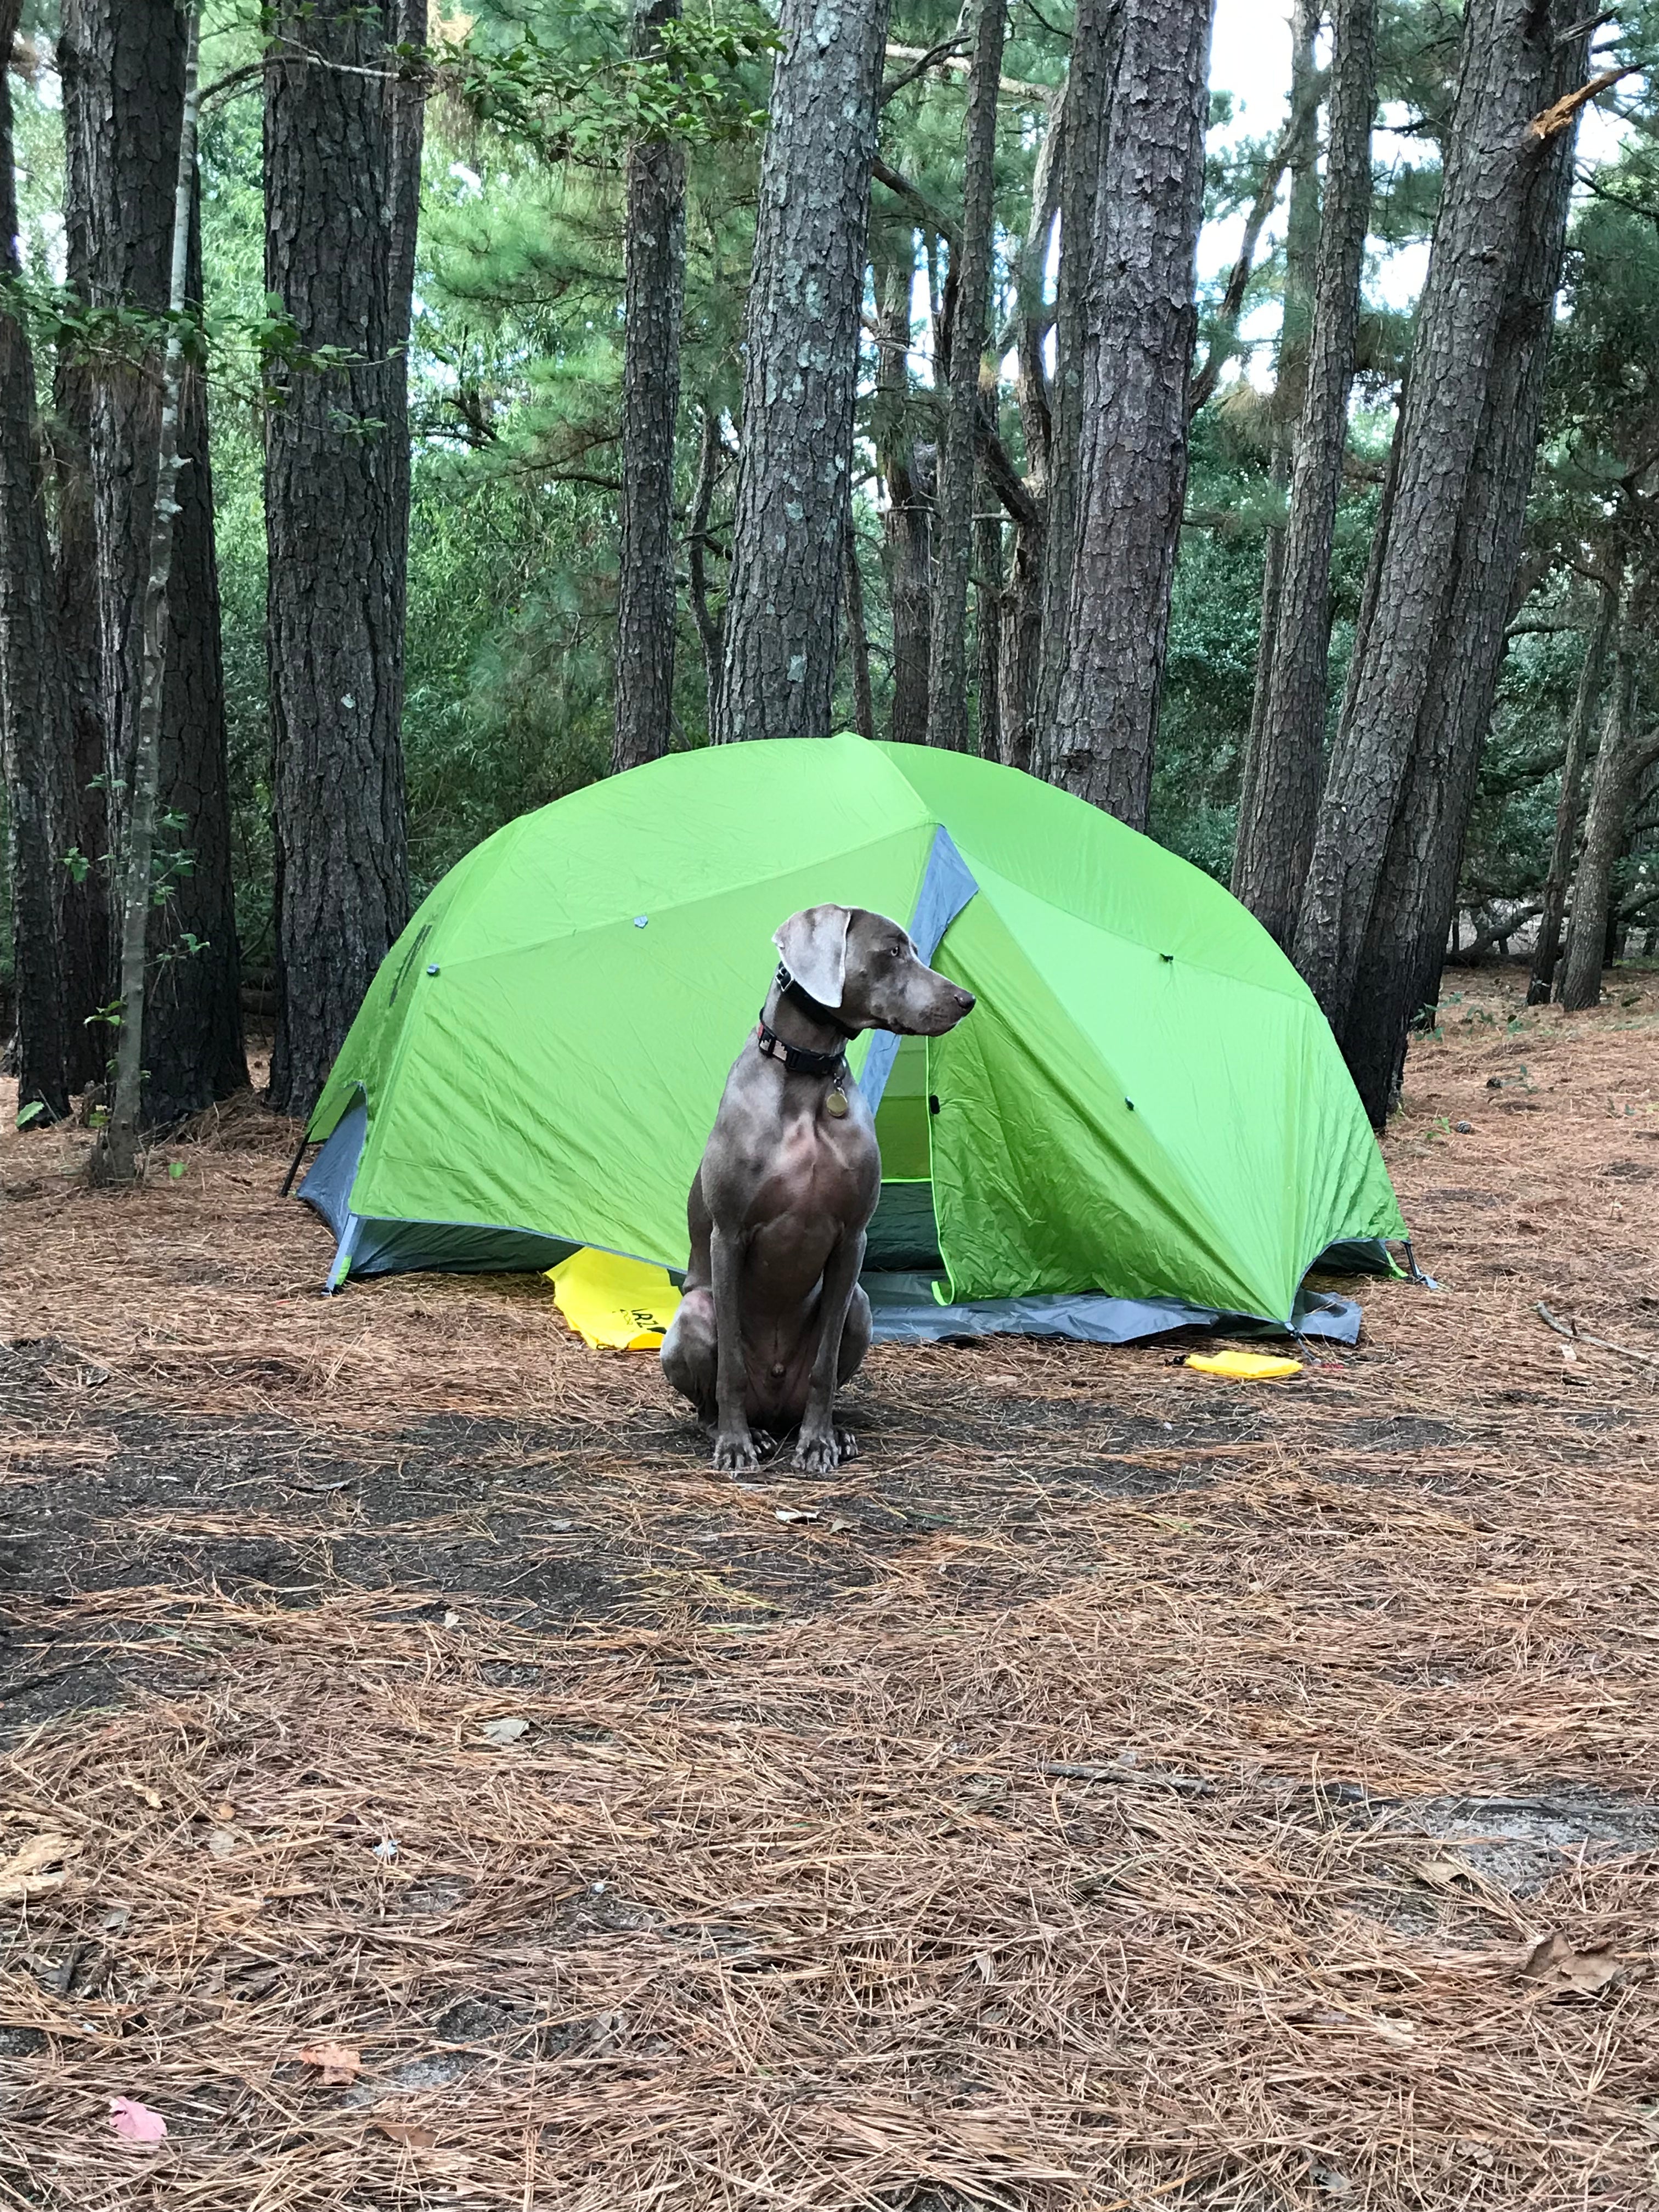 Pup guarding the tent